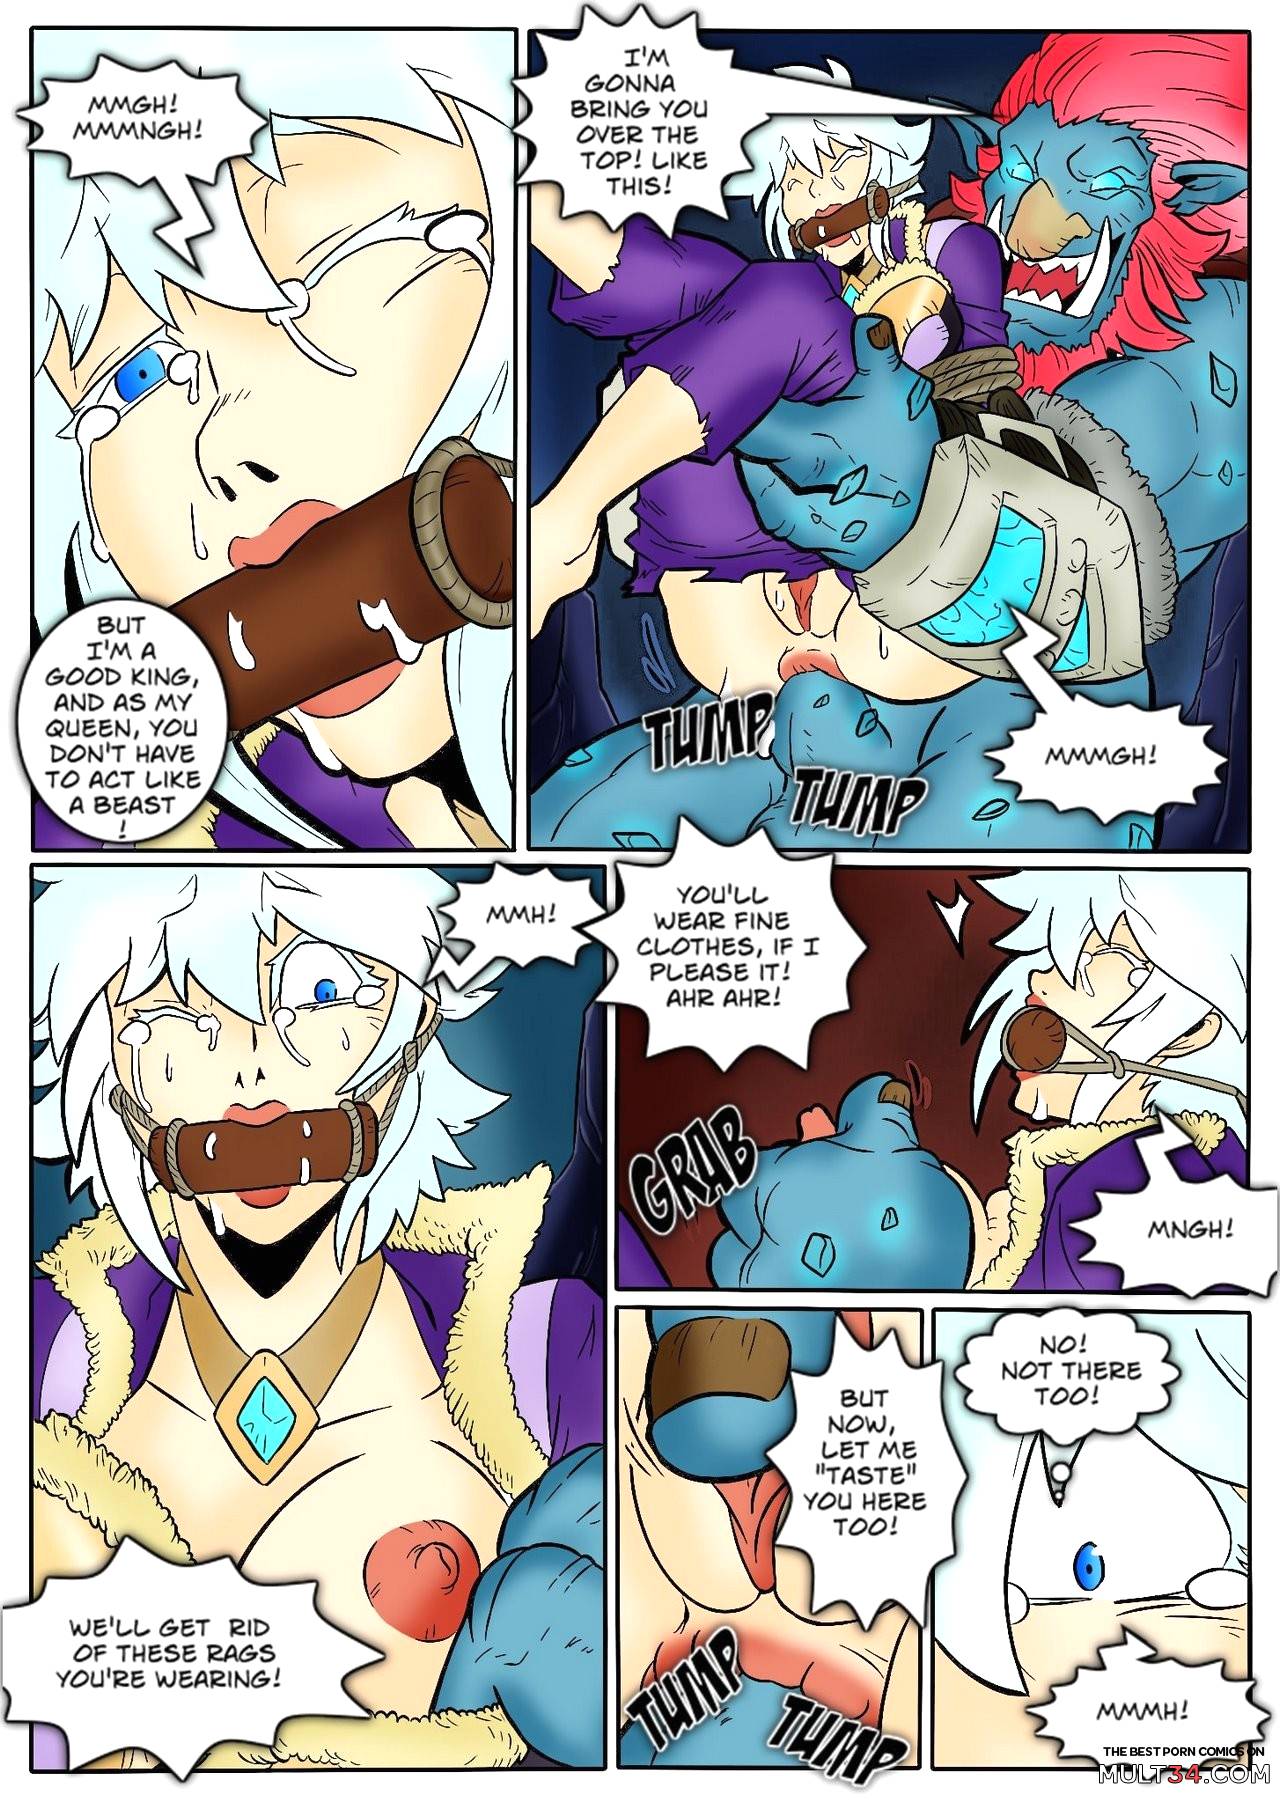 Tales of the Troll King ch. 1 - 3 ] [Colorized] page 30